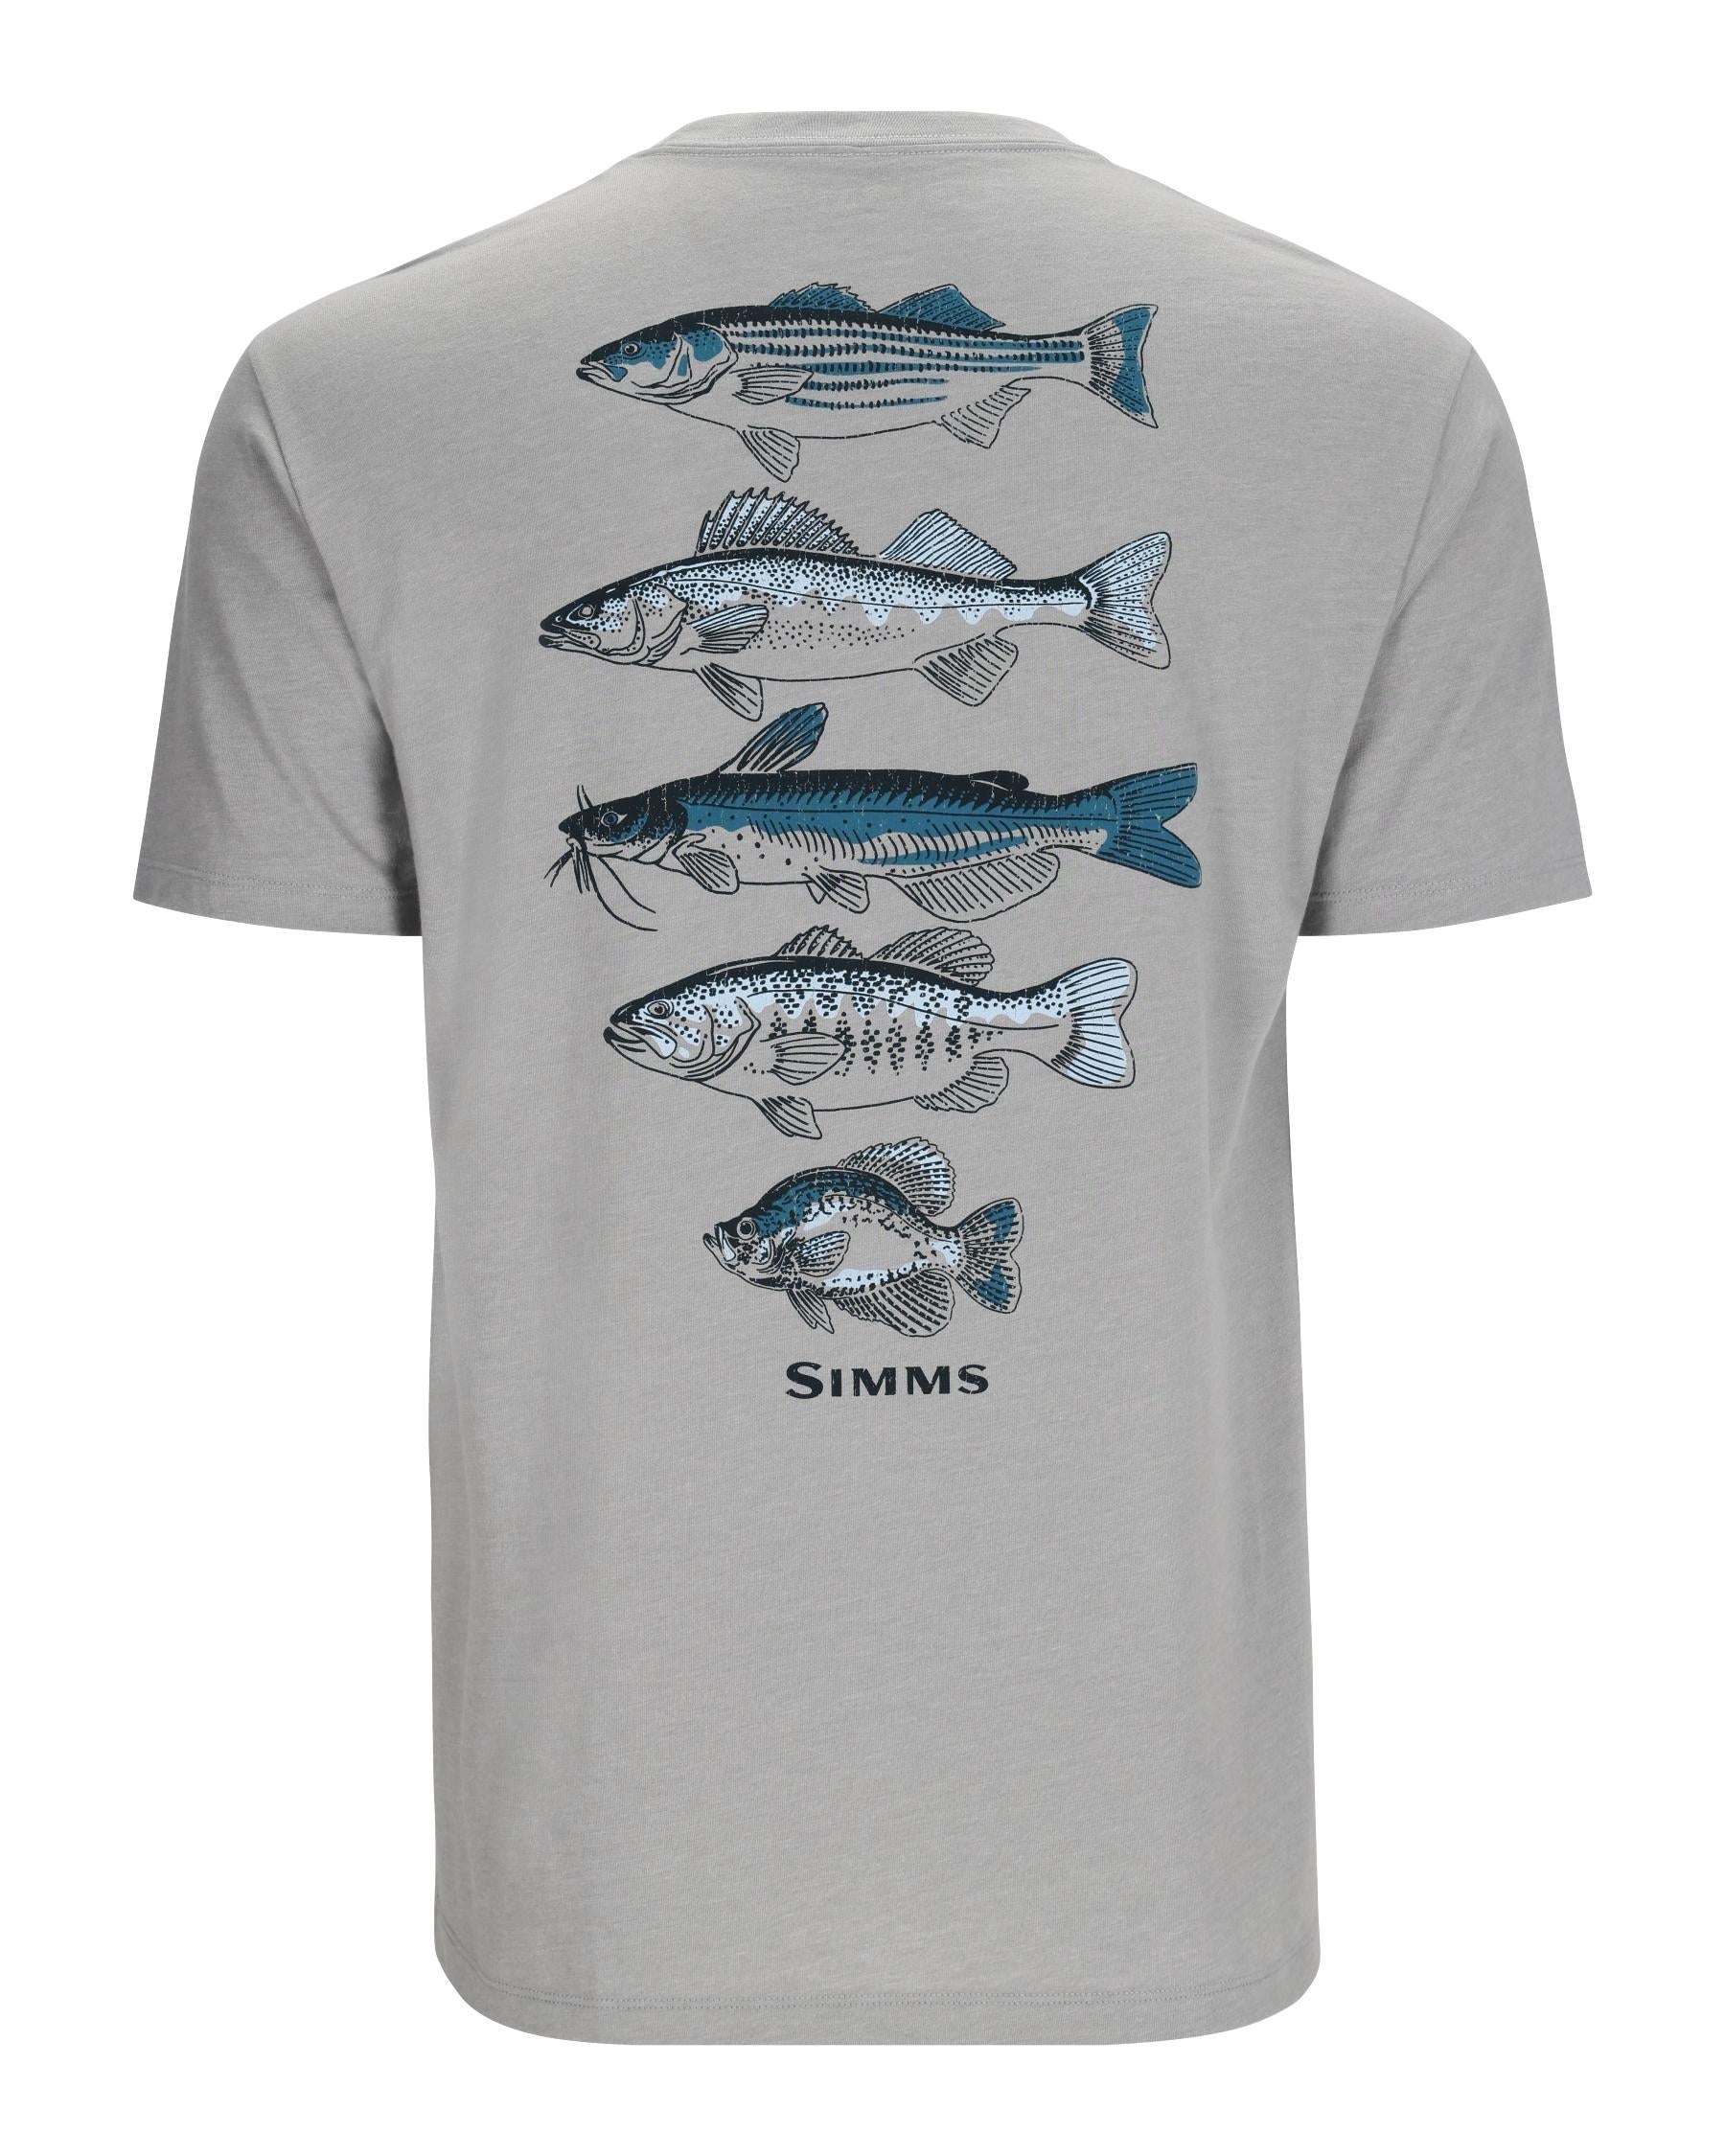 M's Species T-Shirt  Simms Fishing Products